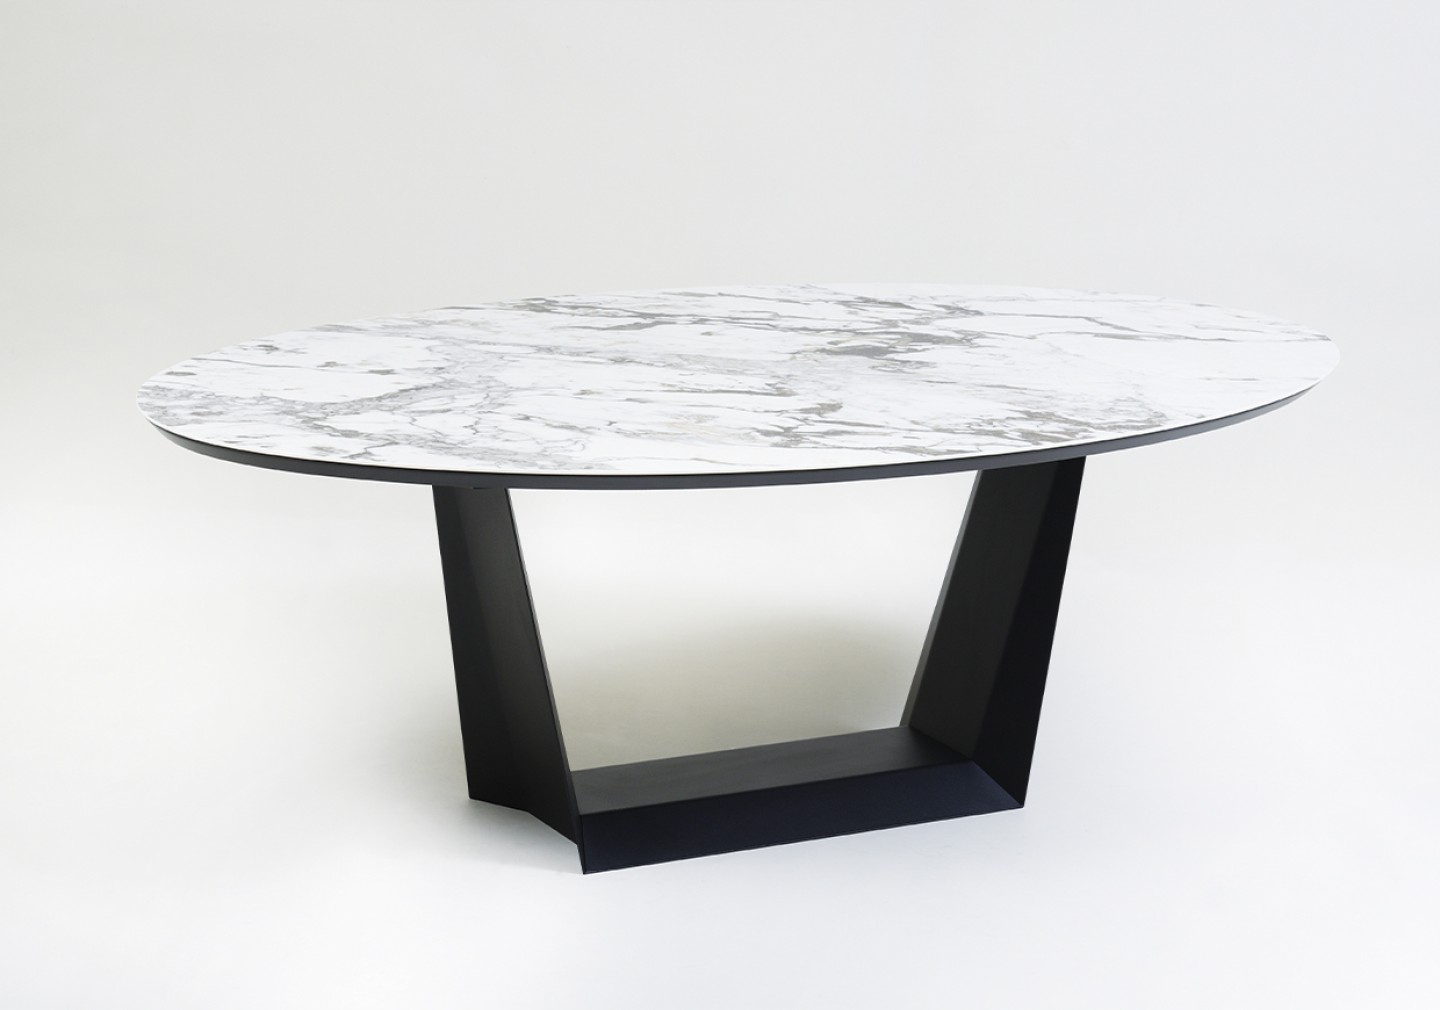 THE ASPEN DINING TABLE